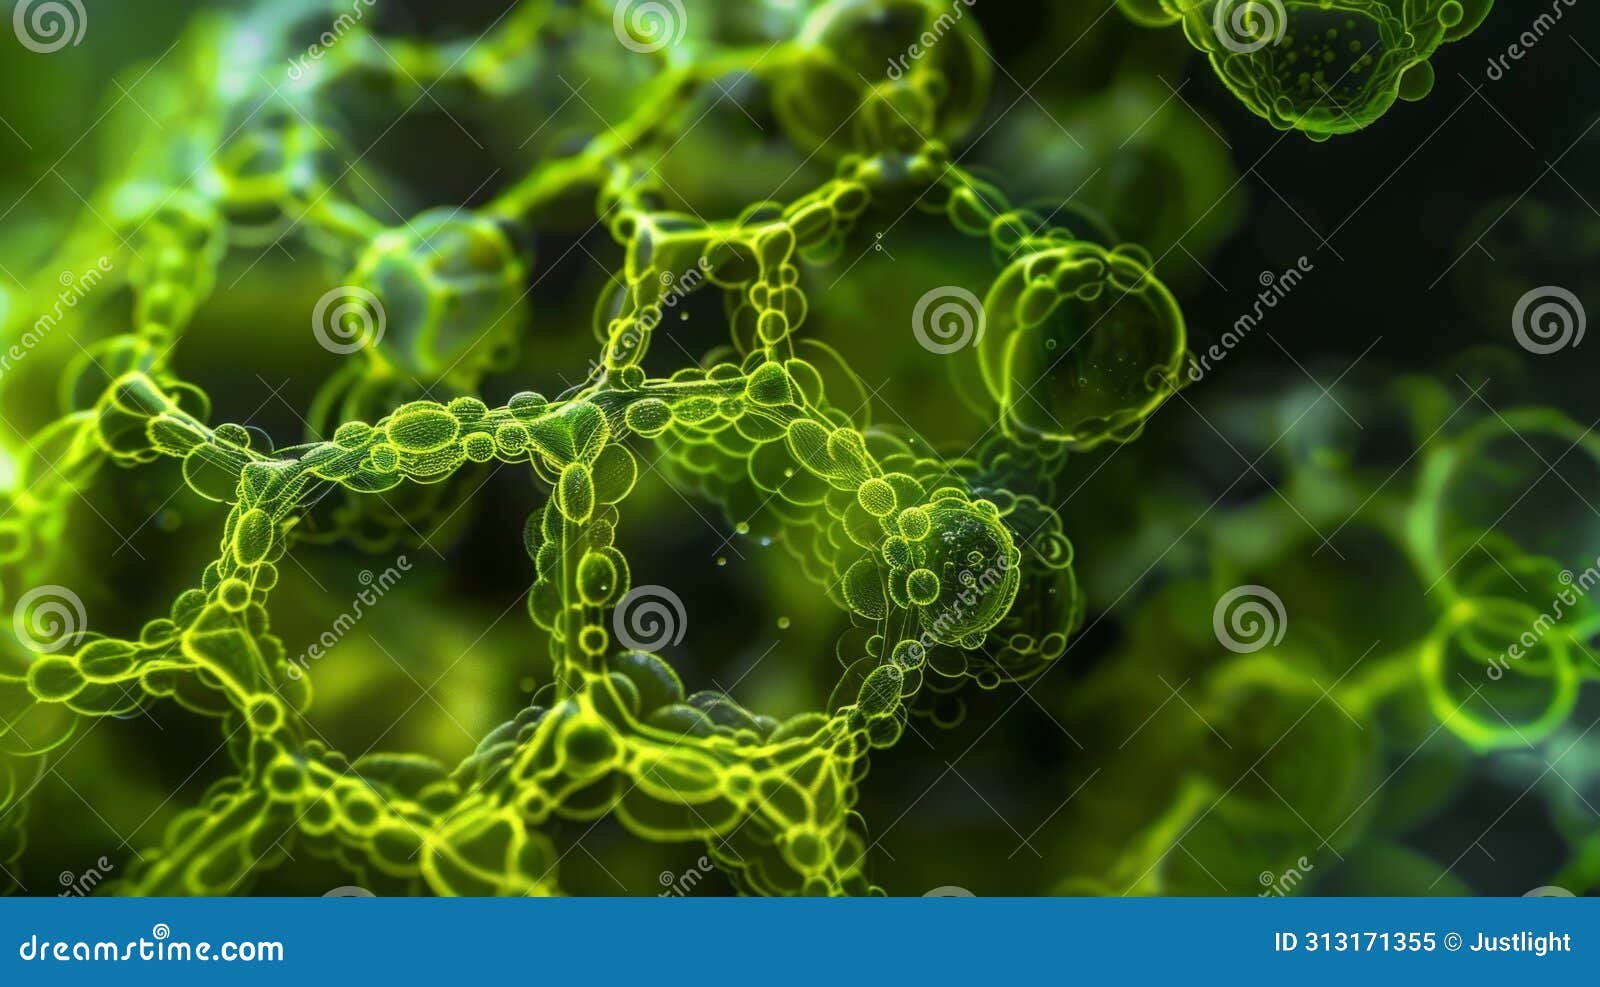 finally we zoom out for a more comprehensive view of the algae cell and its chloroplasts. the intricate network of